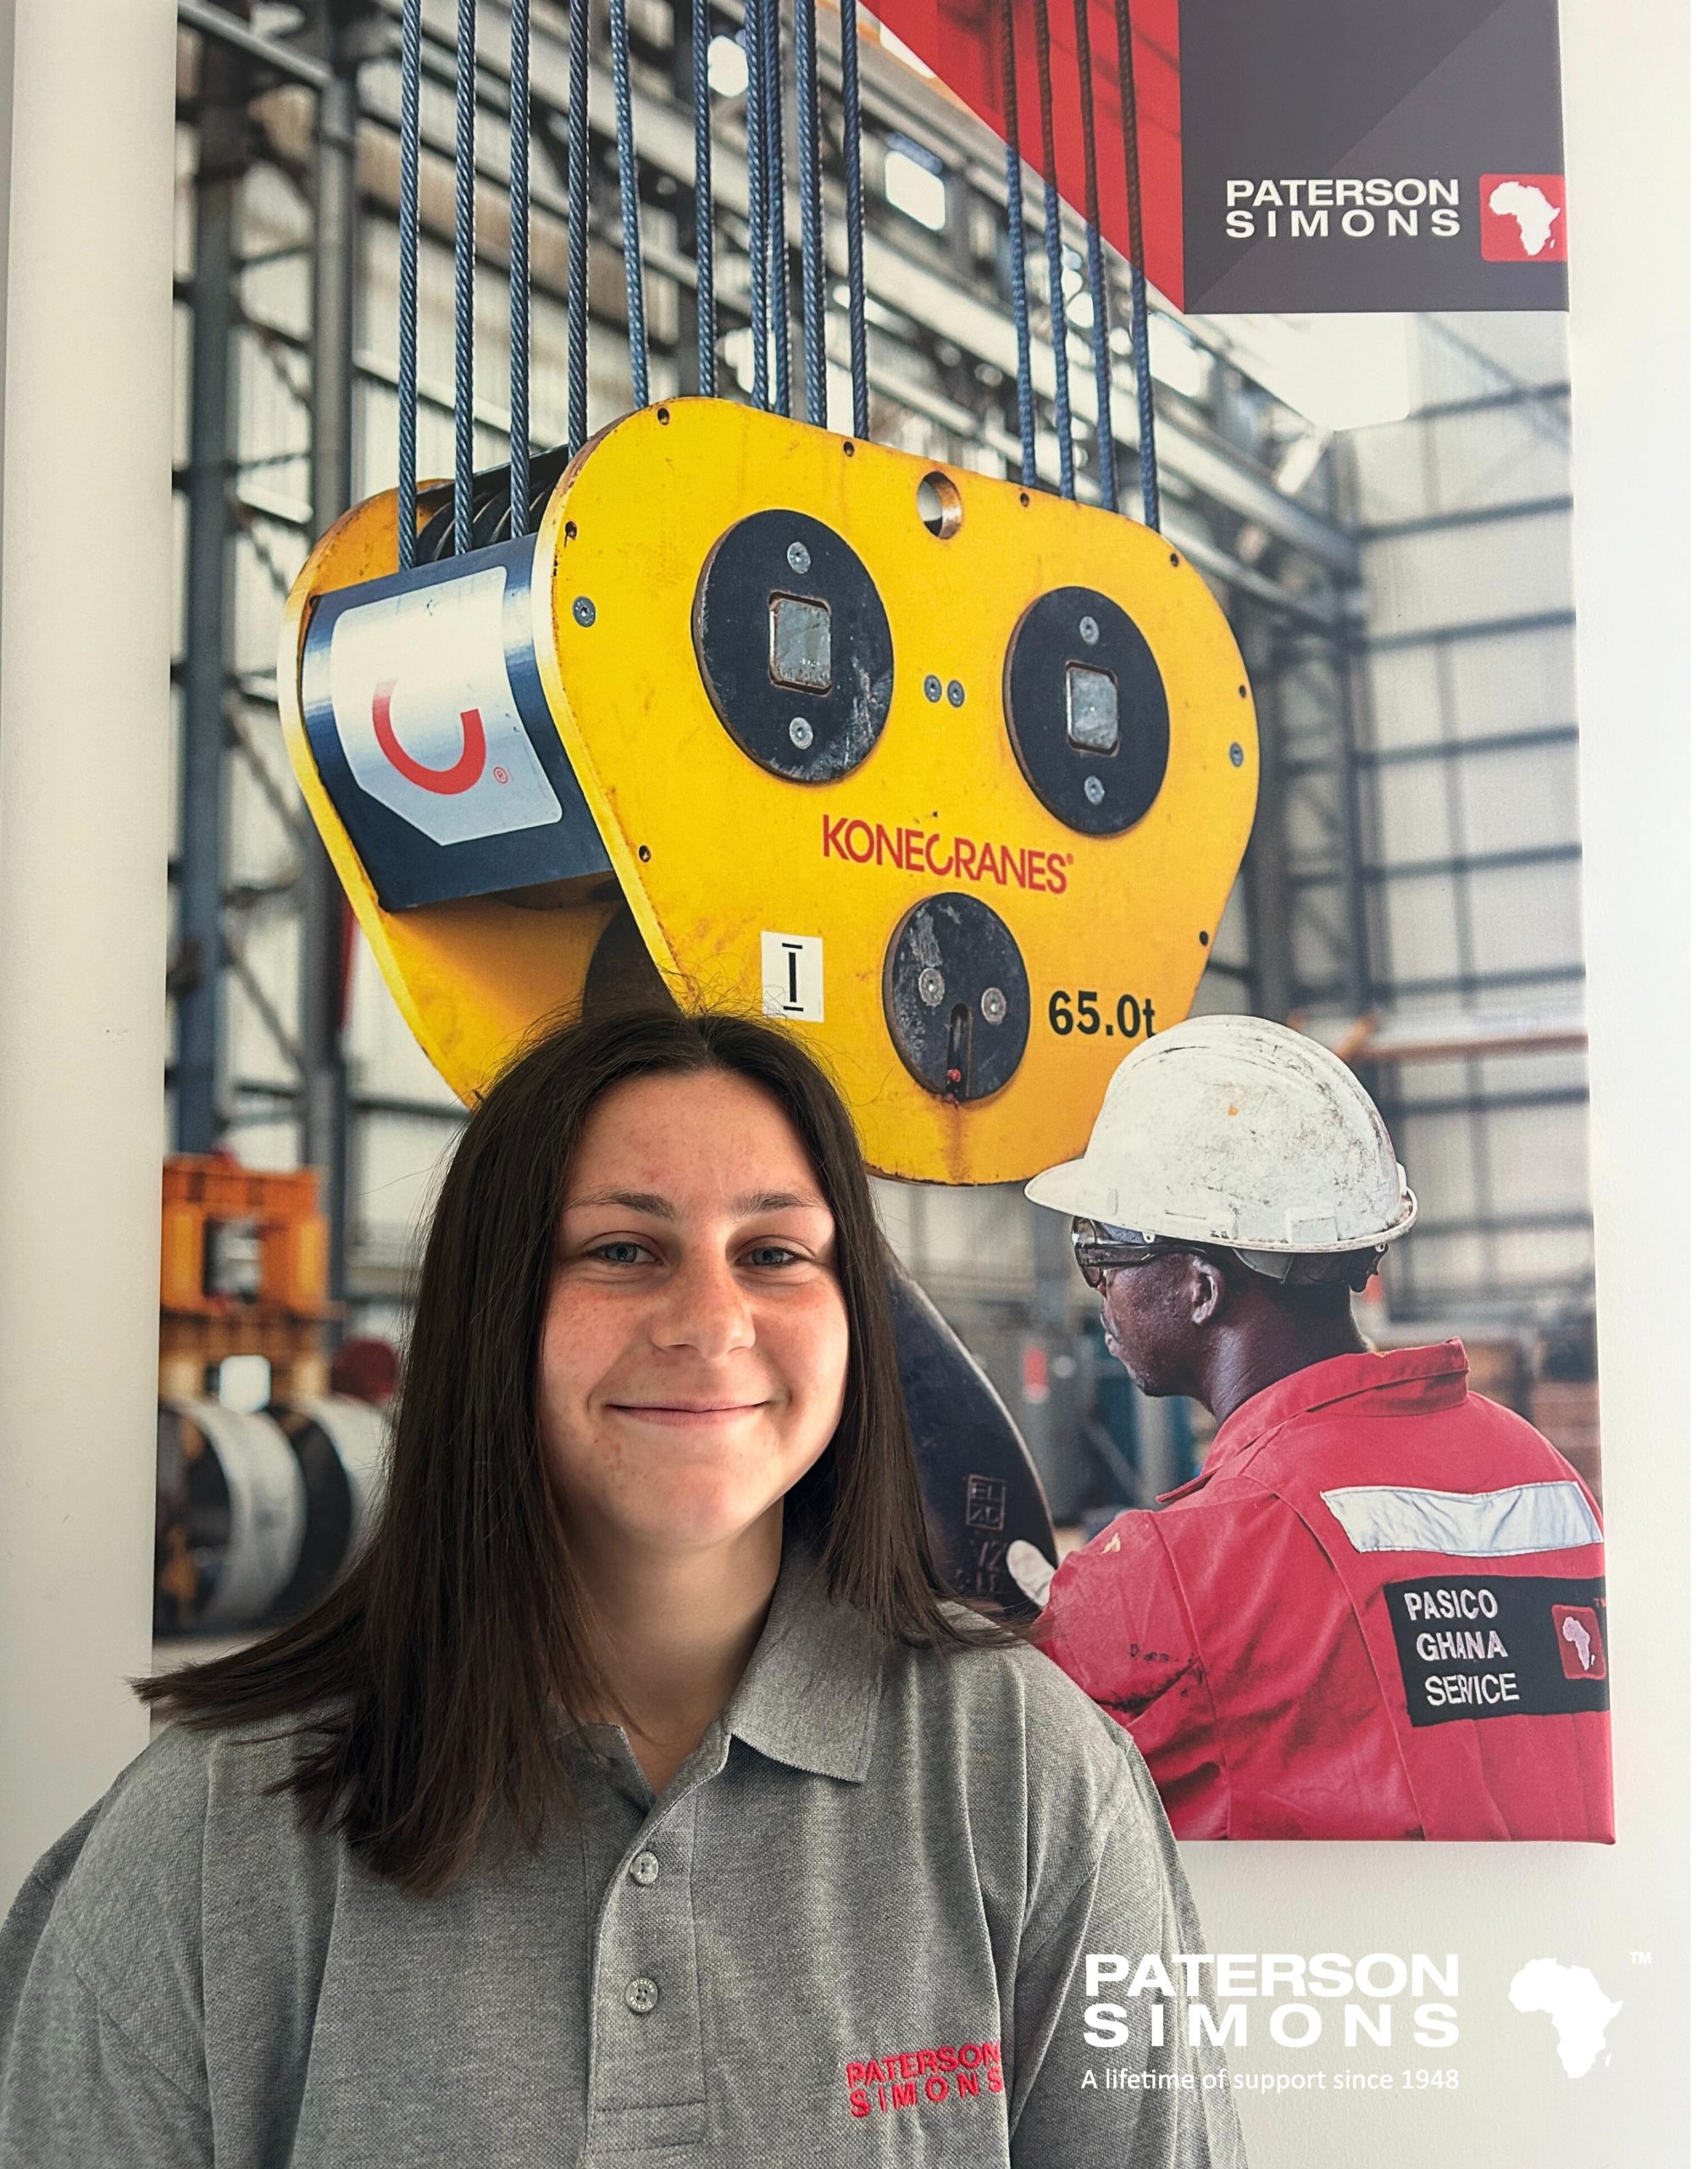 MEET MILLIE COLBRAN – NEW SUBSIDIARY ACCOUNTS ASSISTANT AT PATERSON SIMONS!